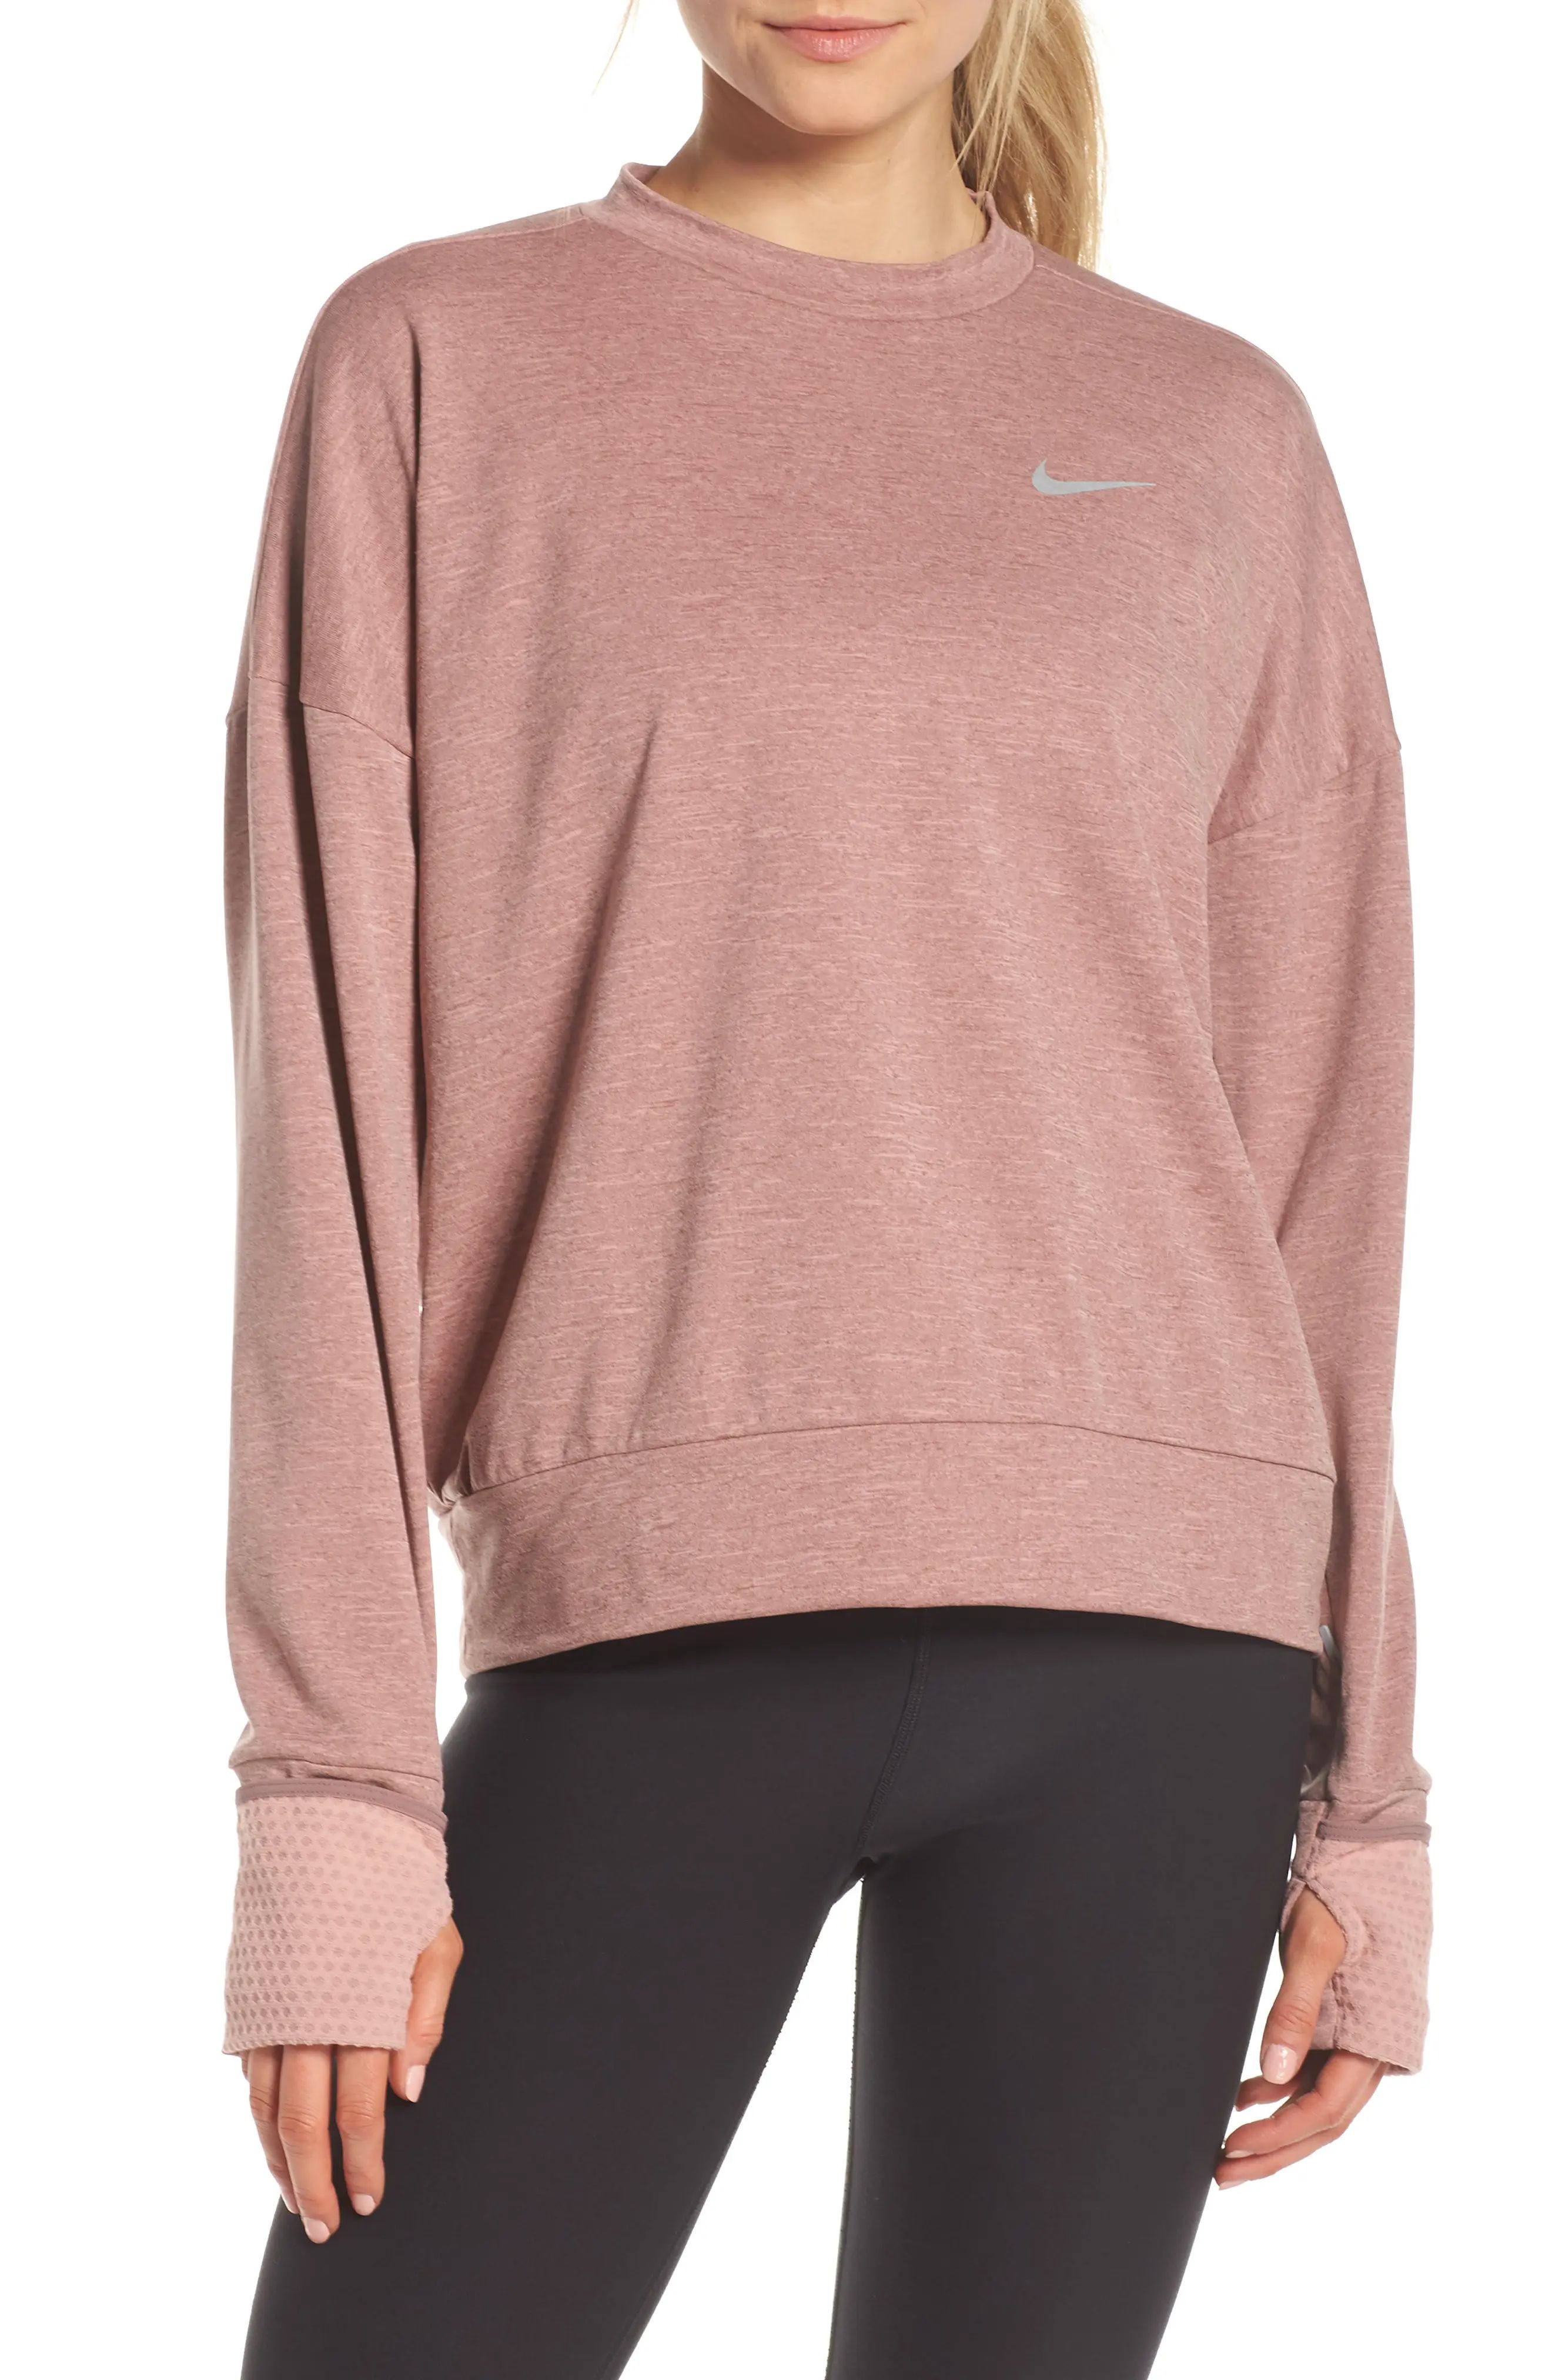 Therma Sphere Element Running Shirt | Nordstrom